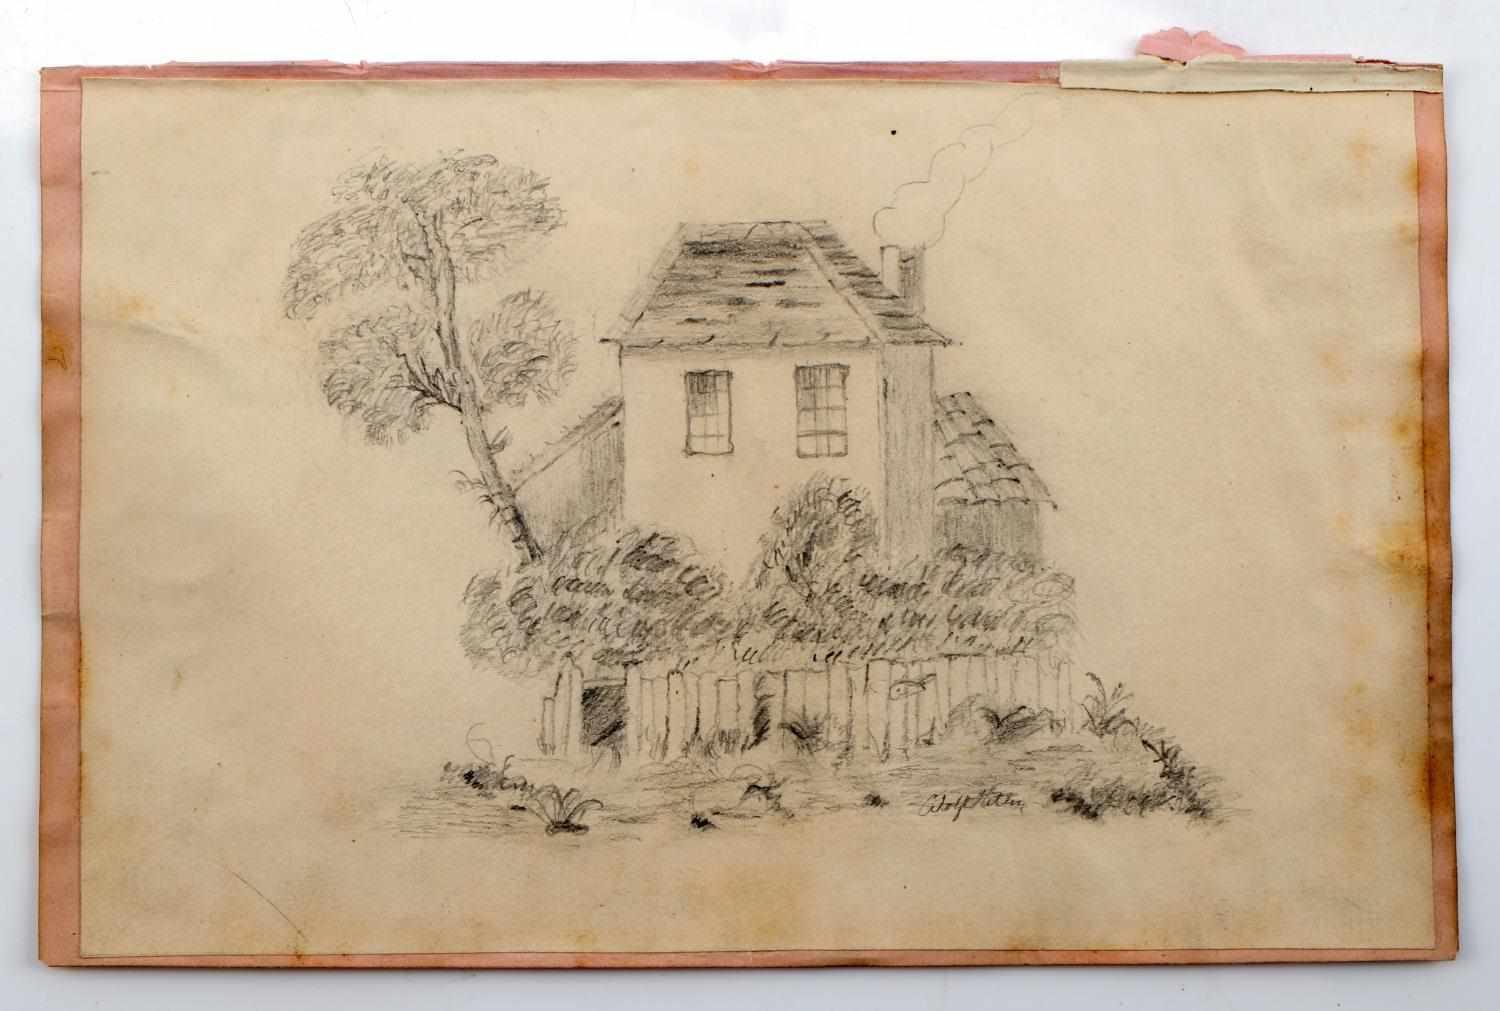 ADOLF HITLER SKETCH BOOK RECOVERED PENCIL DRAWING